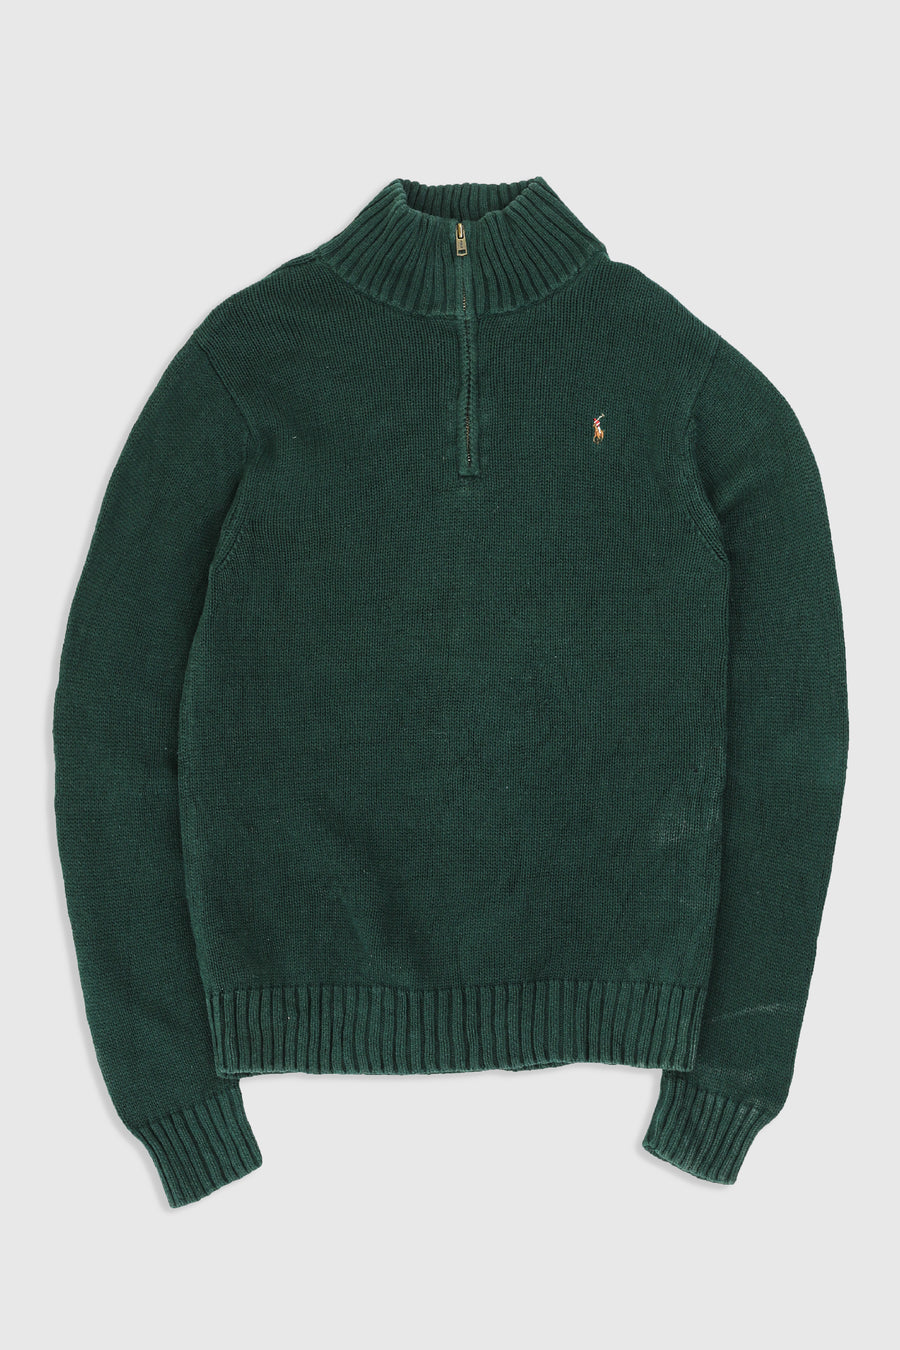 Vintage Polo 1/4 Zip Knit Sweater